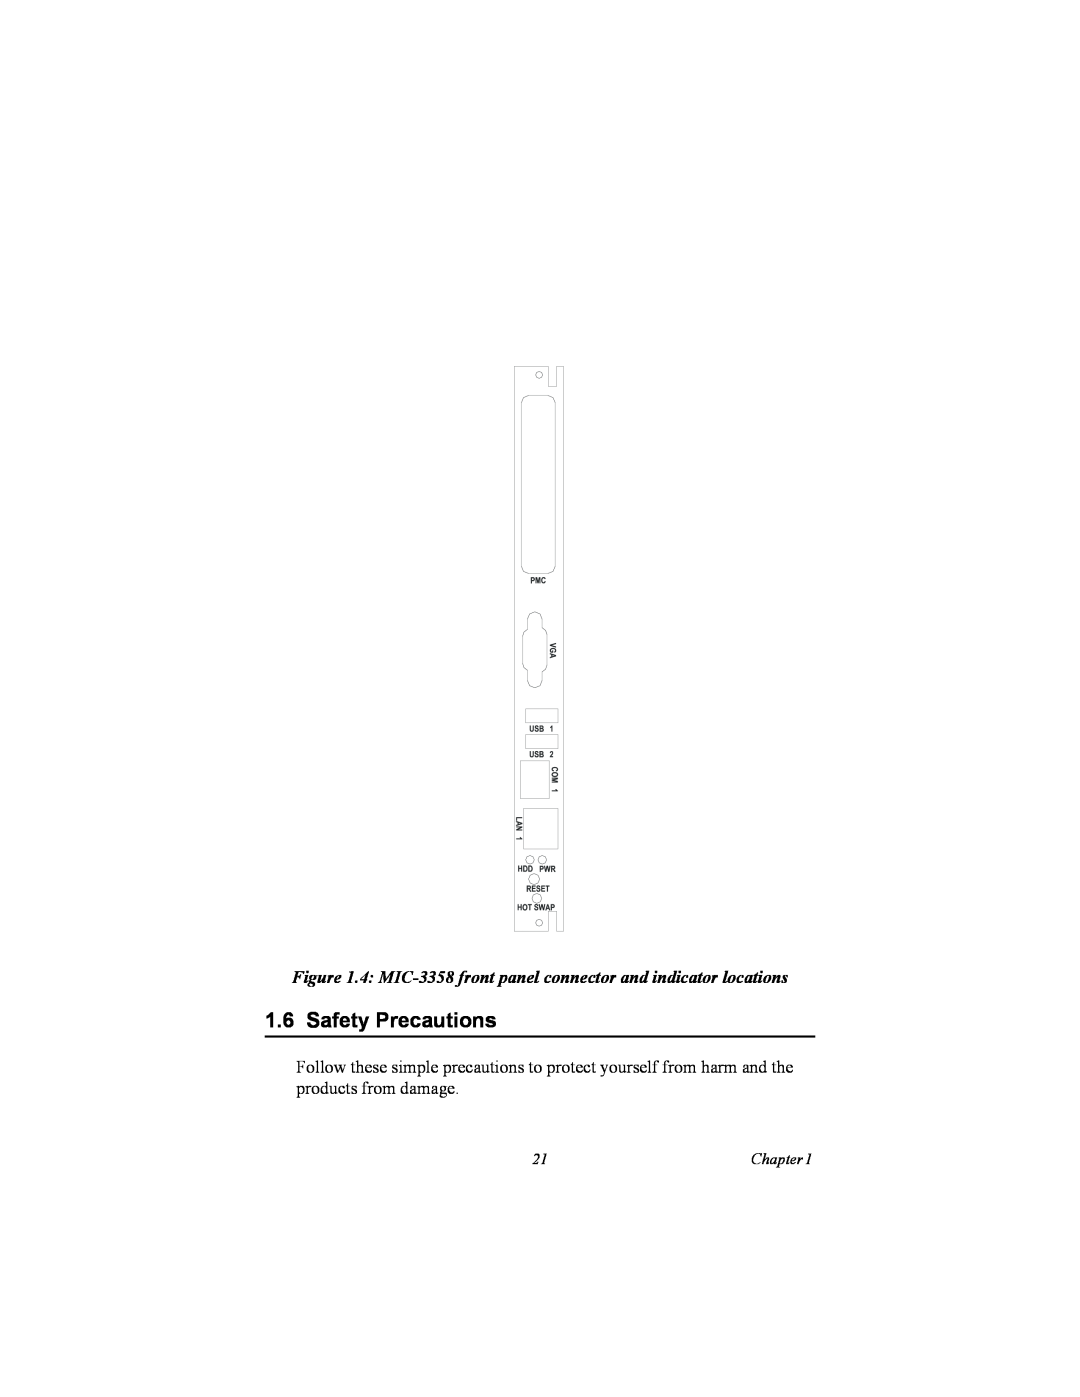 Intel user manual Safety Precautions, 4 MIC-3358 front panel connector and indicator locations 